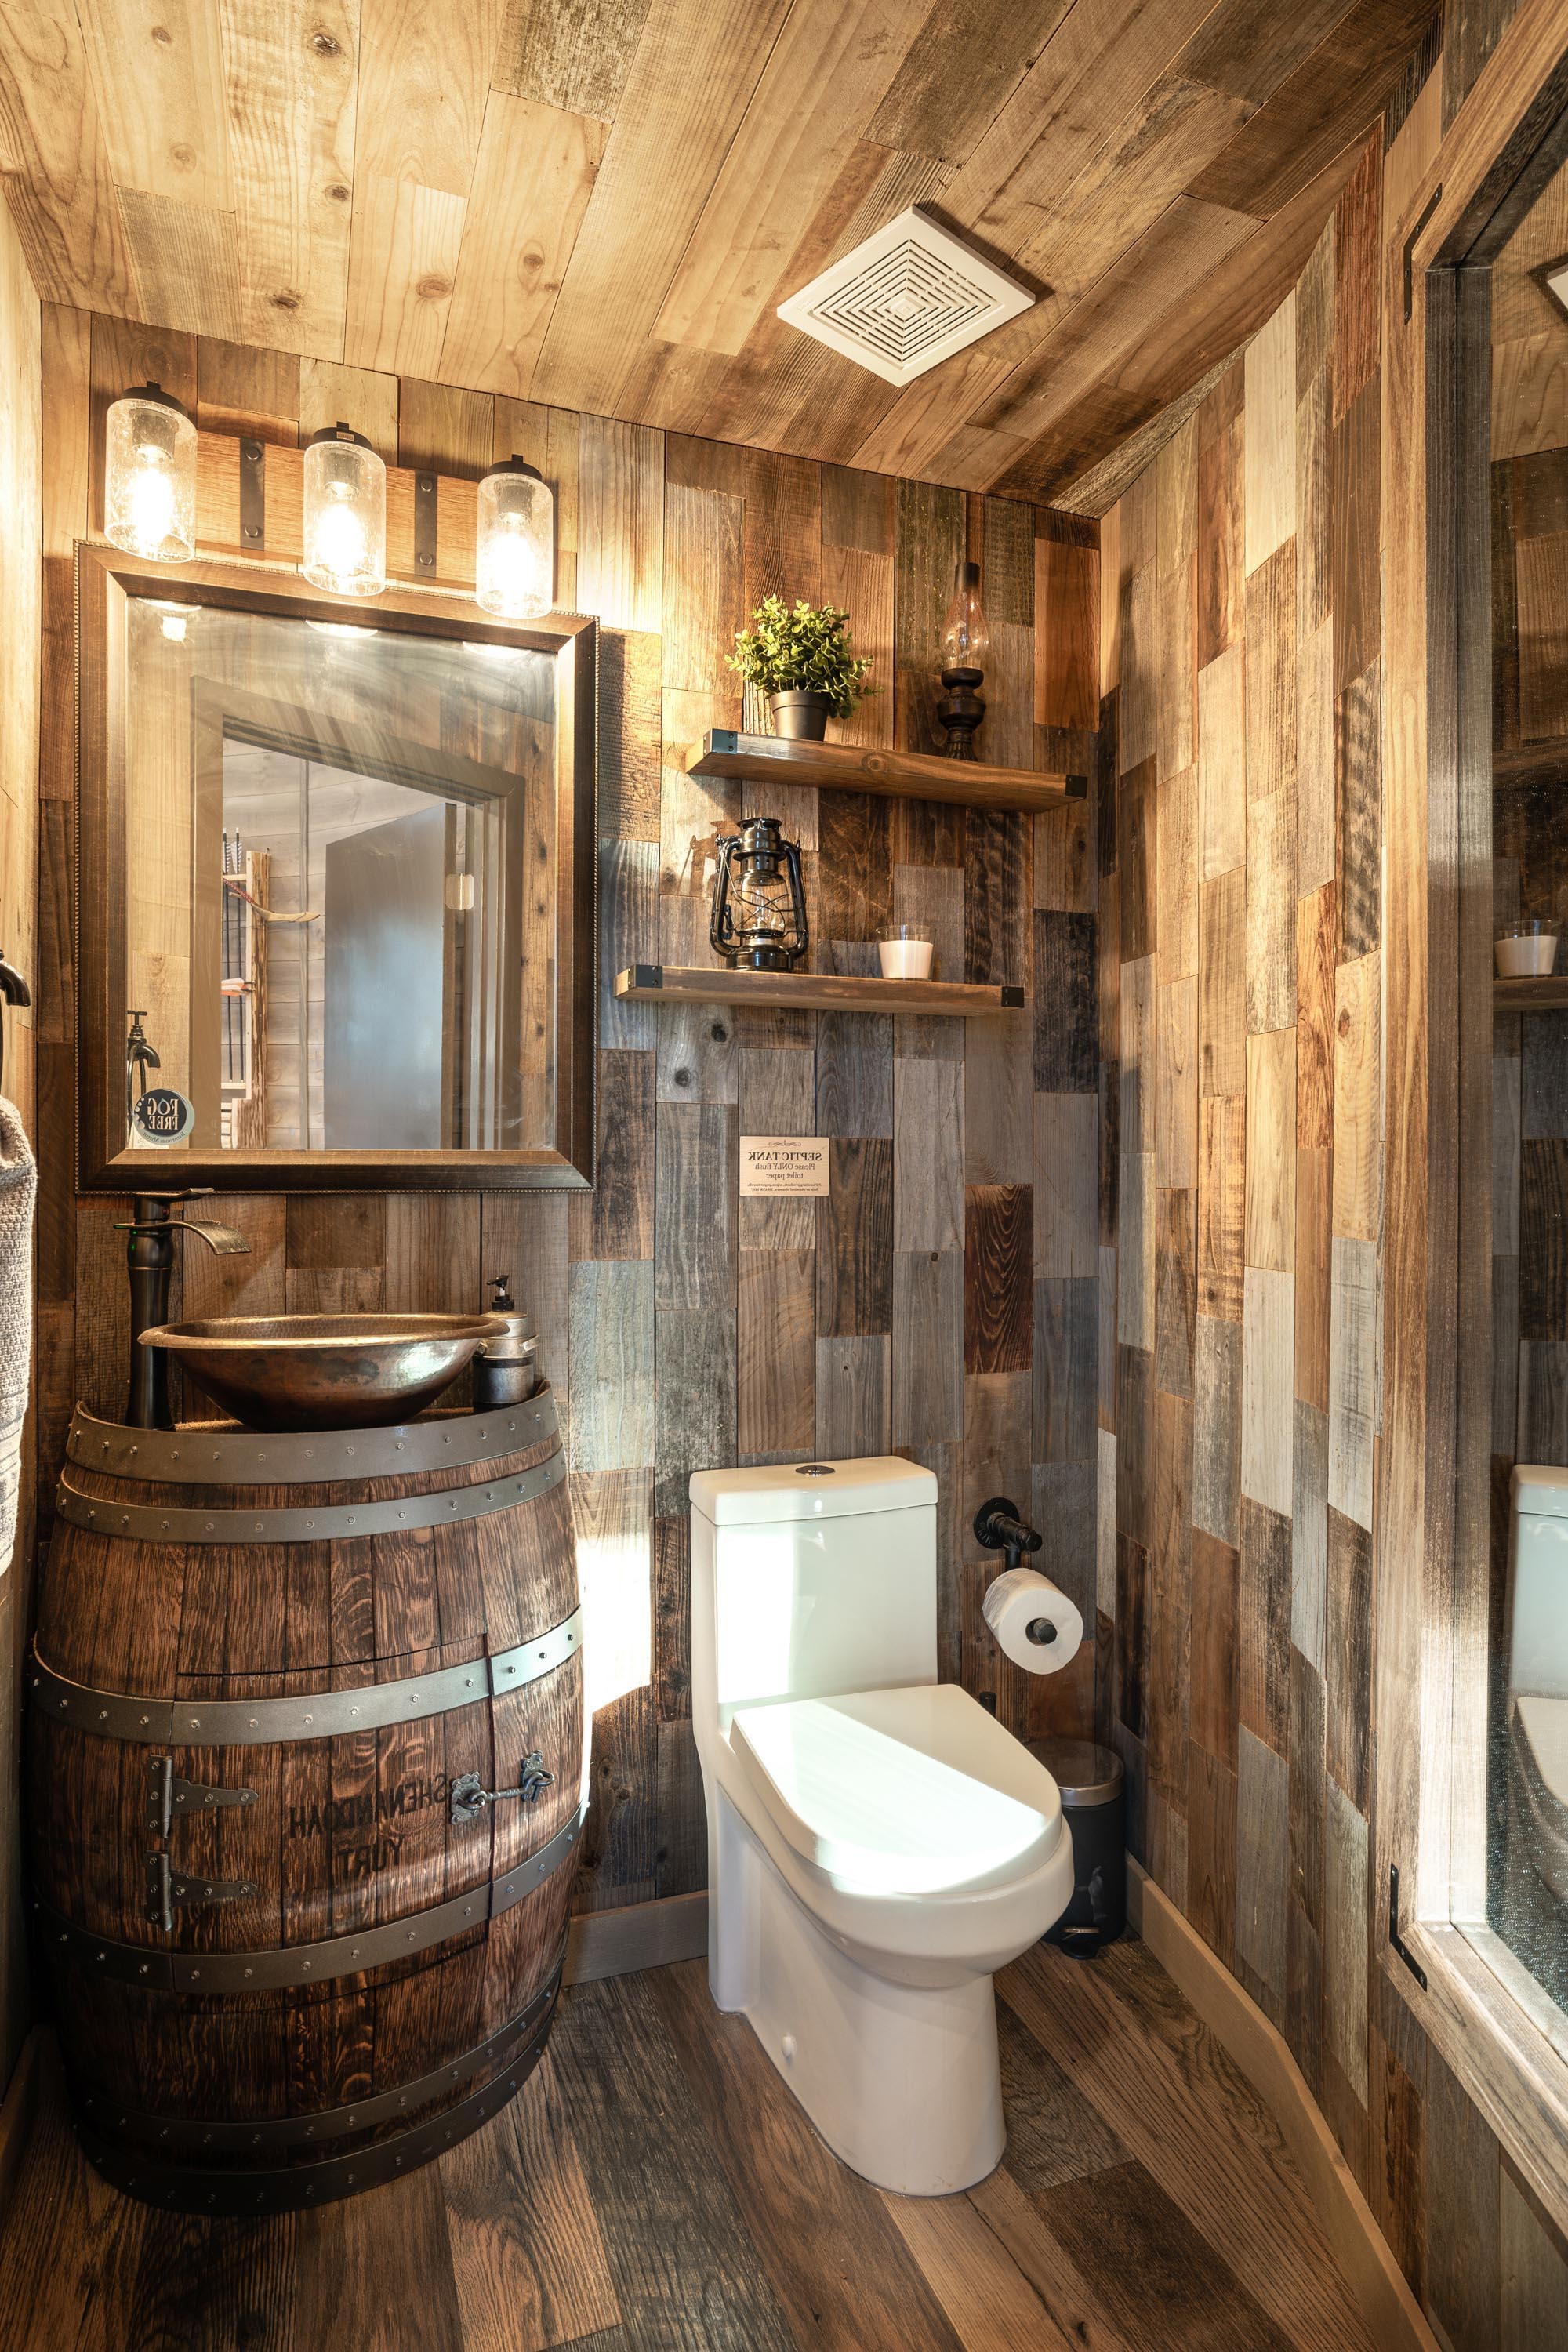 <span  class="uc_style_uc_tiles_grid_image_elementor_uc_items_attribute_title" style="color:#ffffff;">Cozy second bathroom with a wine-barrel sink</span>